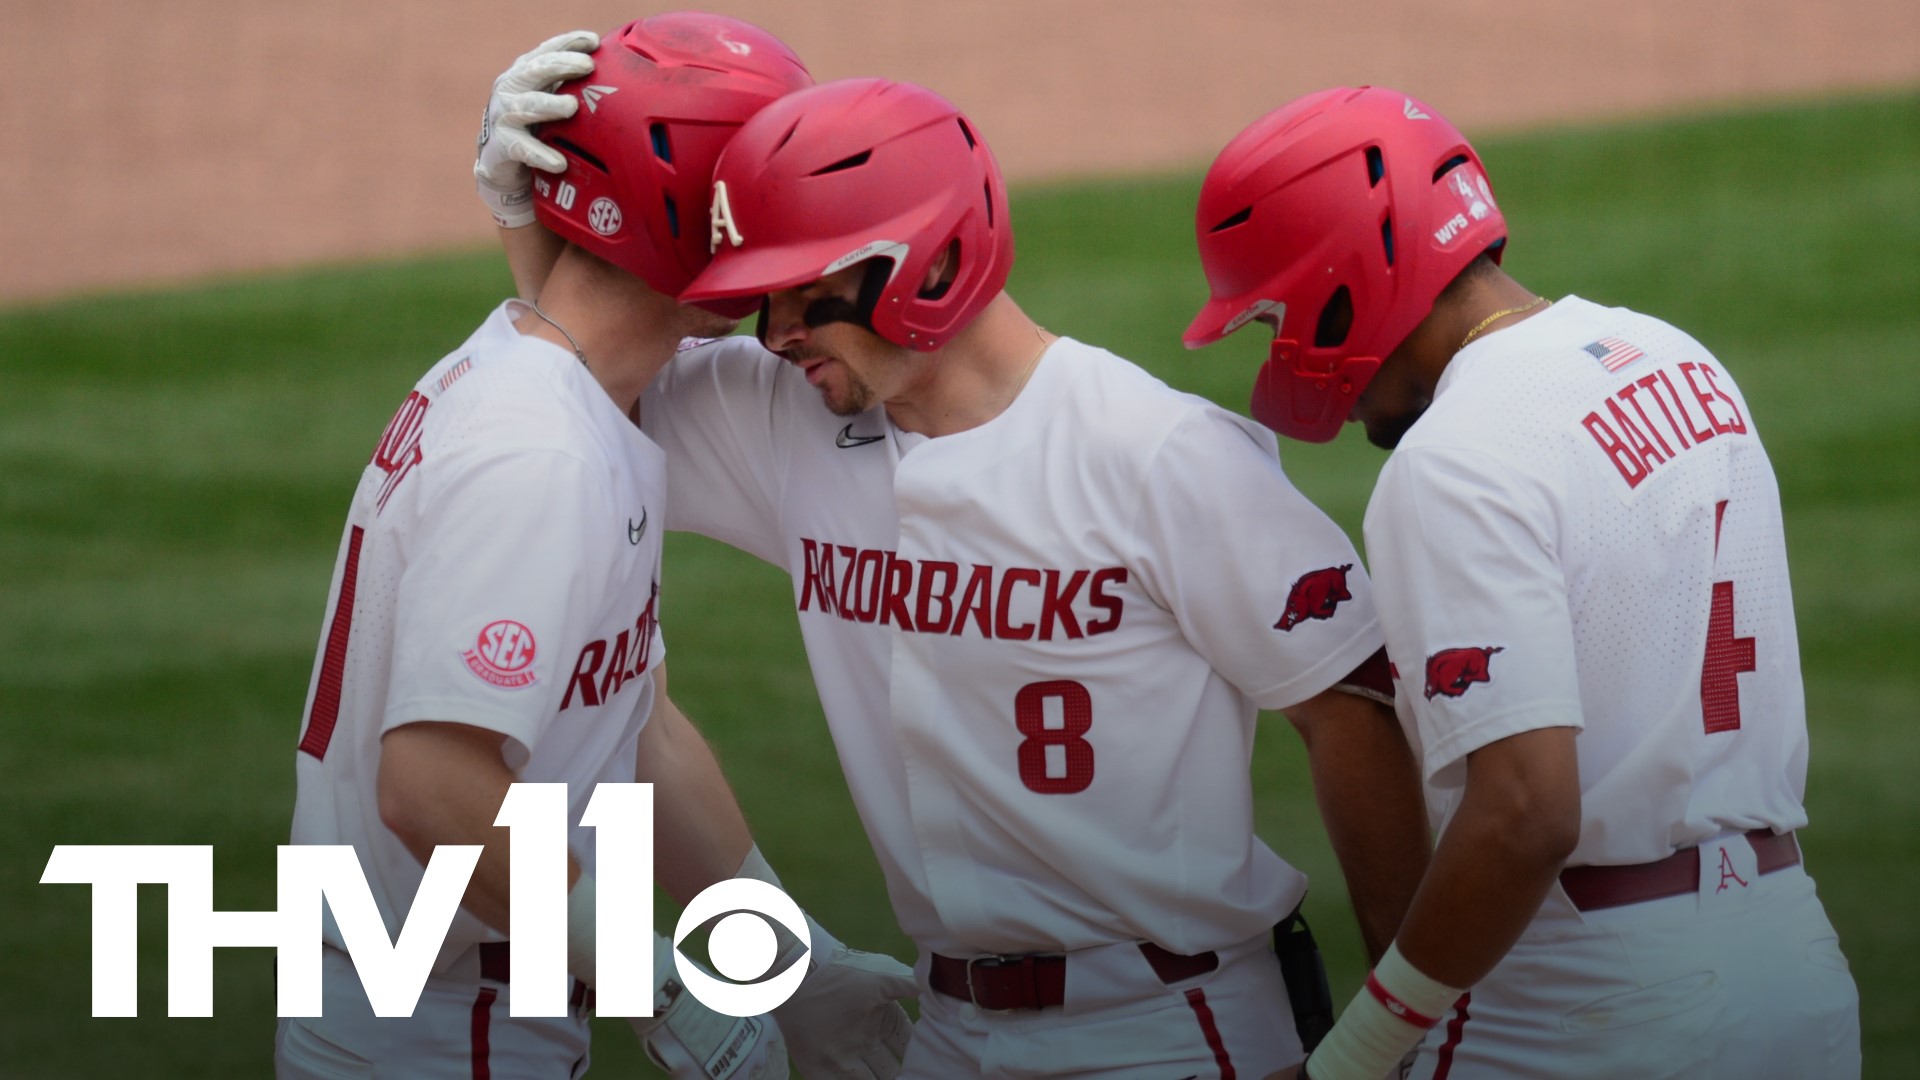 The Razorbacks rallied from a deficit of at least three runs for the 13th time this season, including for the eighth time at home.